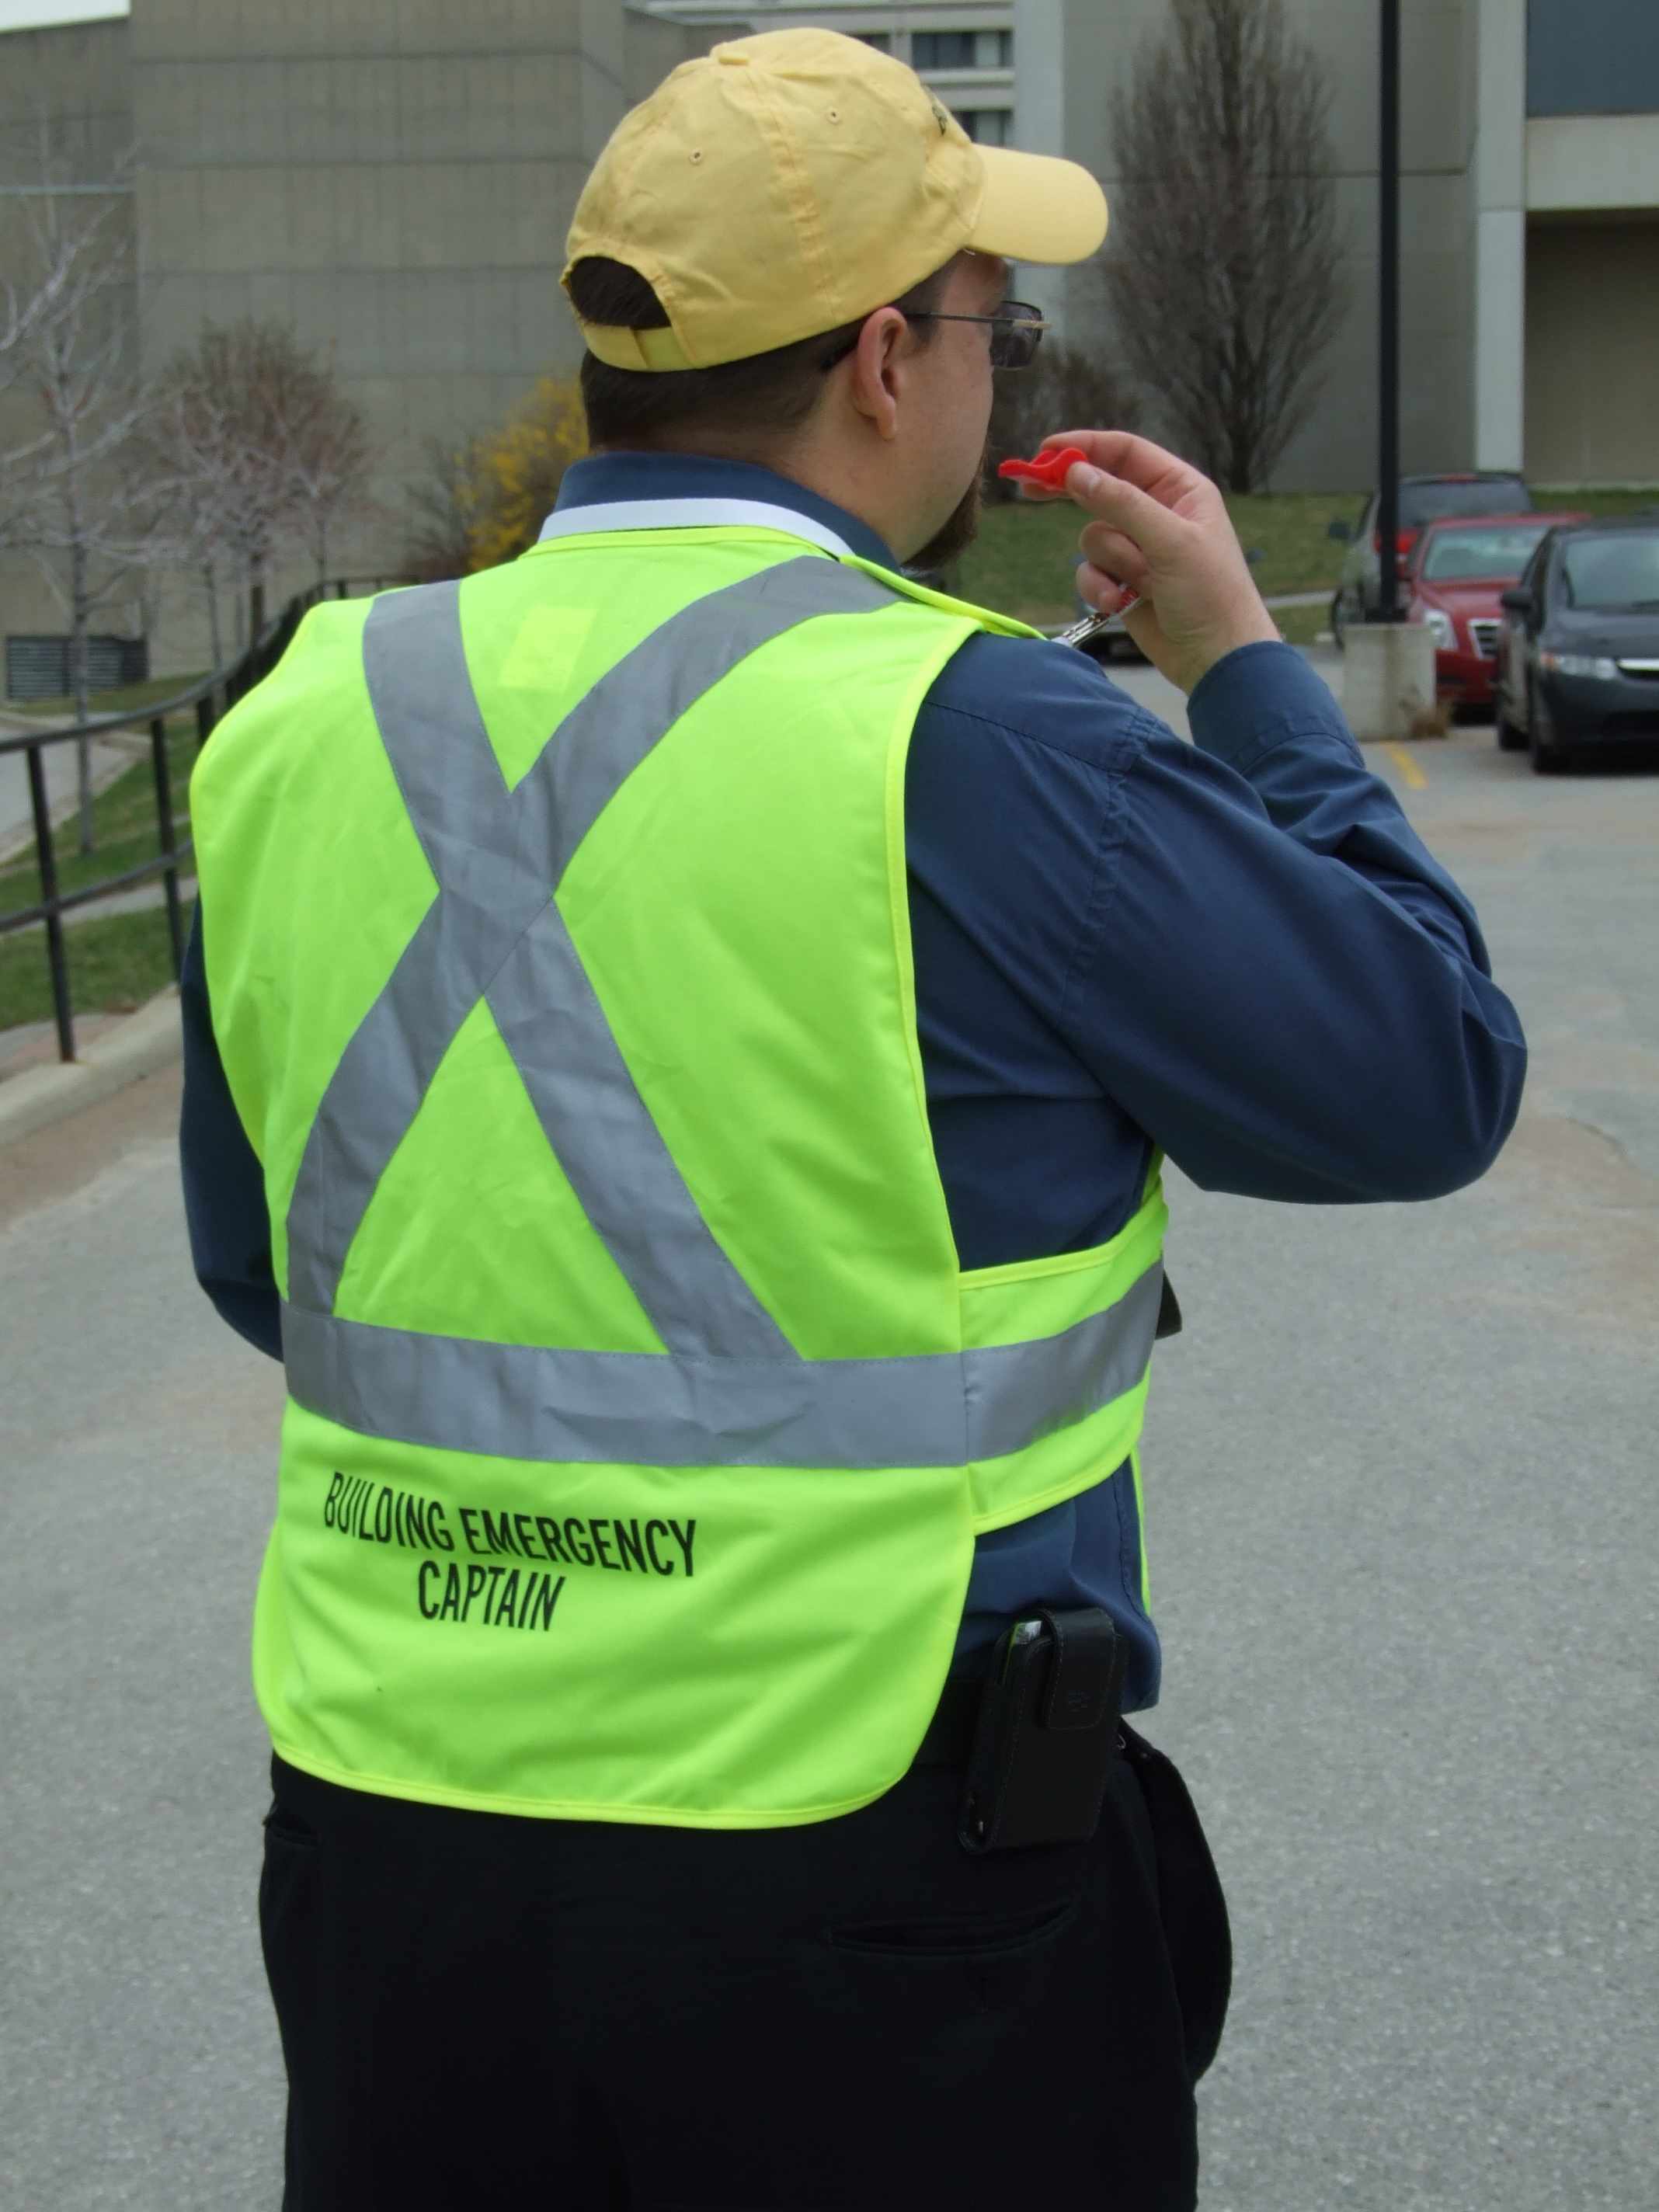 Person with a vest displaying building emergency captain blowing a whistle